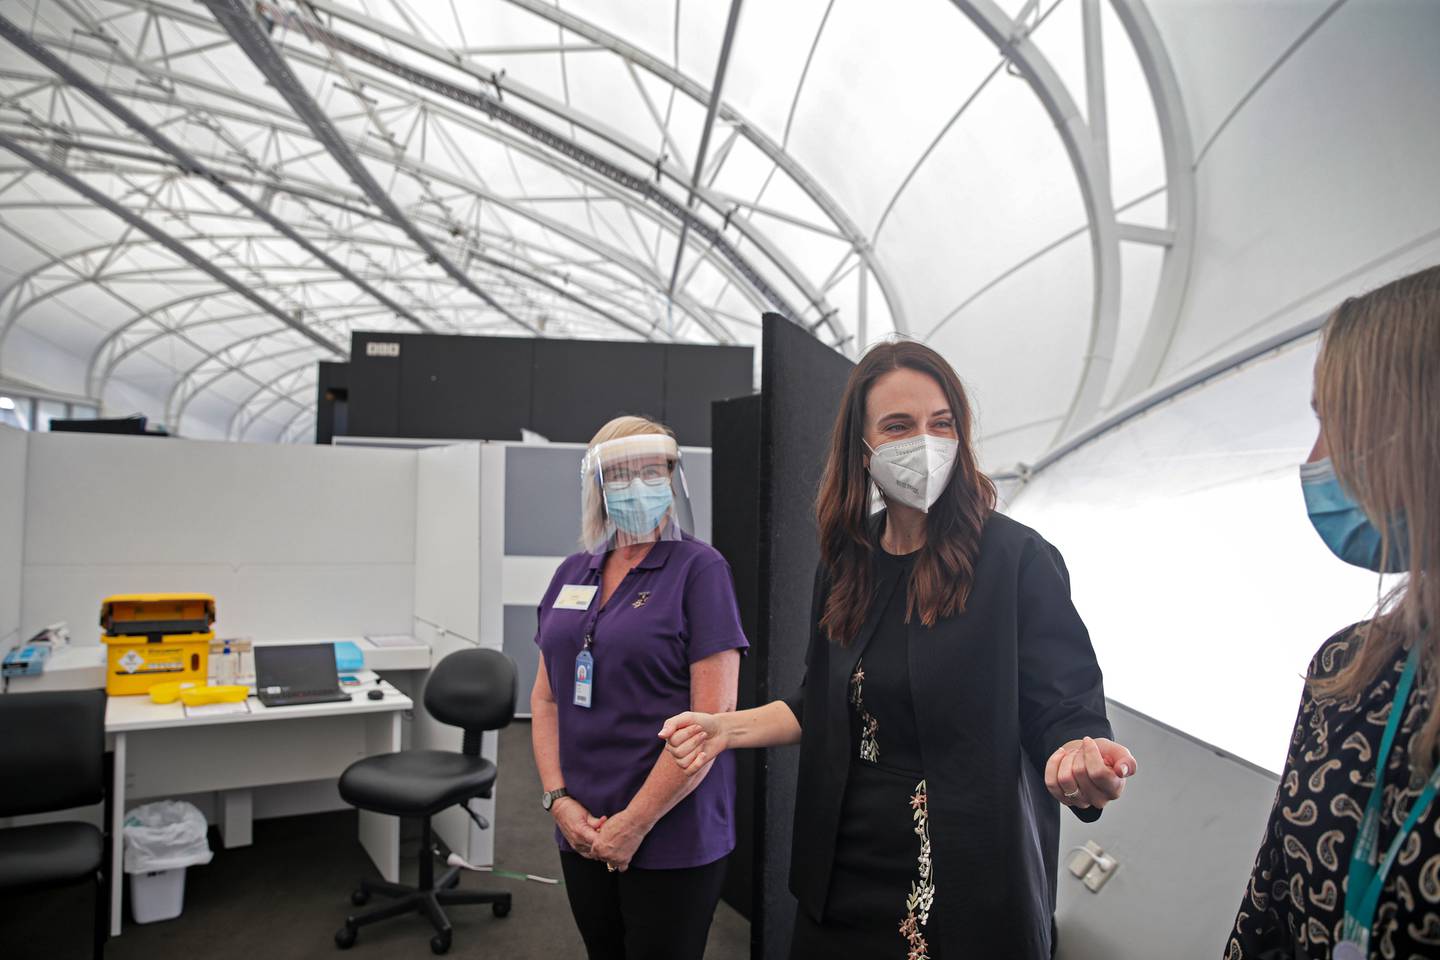 rime Minister Jacinda Ardern visits the new vaccination centre at the Cloud in Tamaki Makaurau to promote boosters in response to the Omicron strain of Covid 19. Photo / Alex Burton